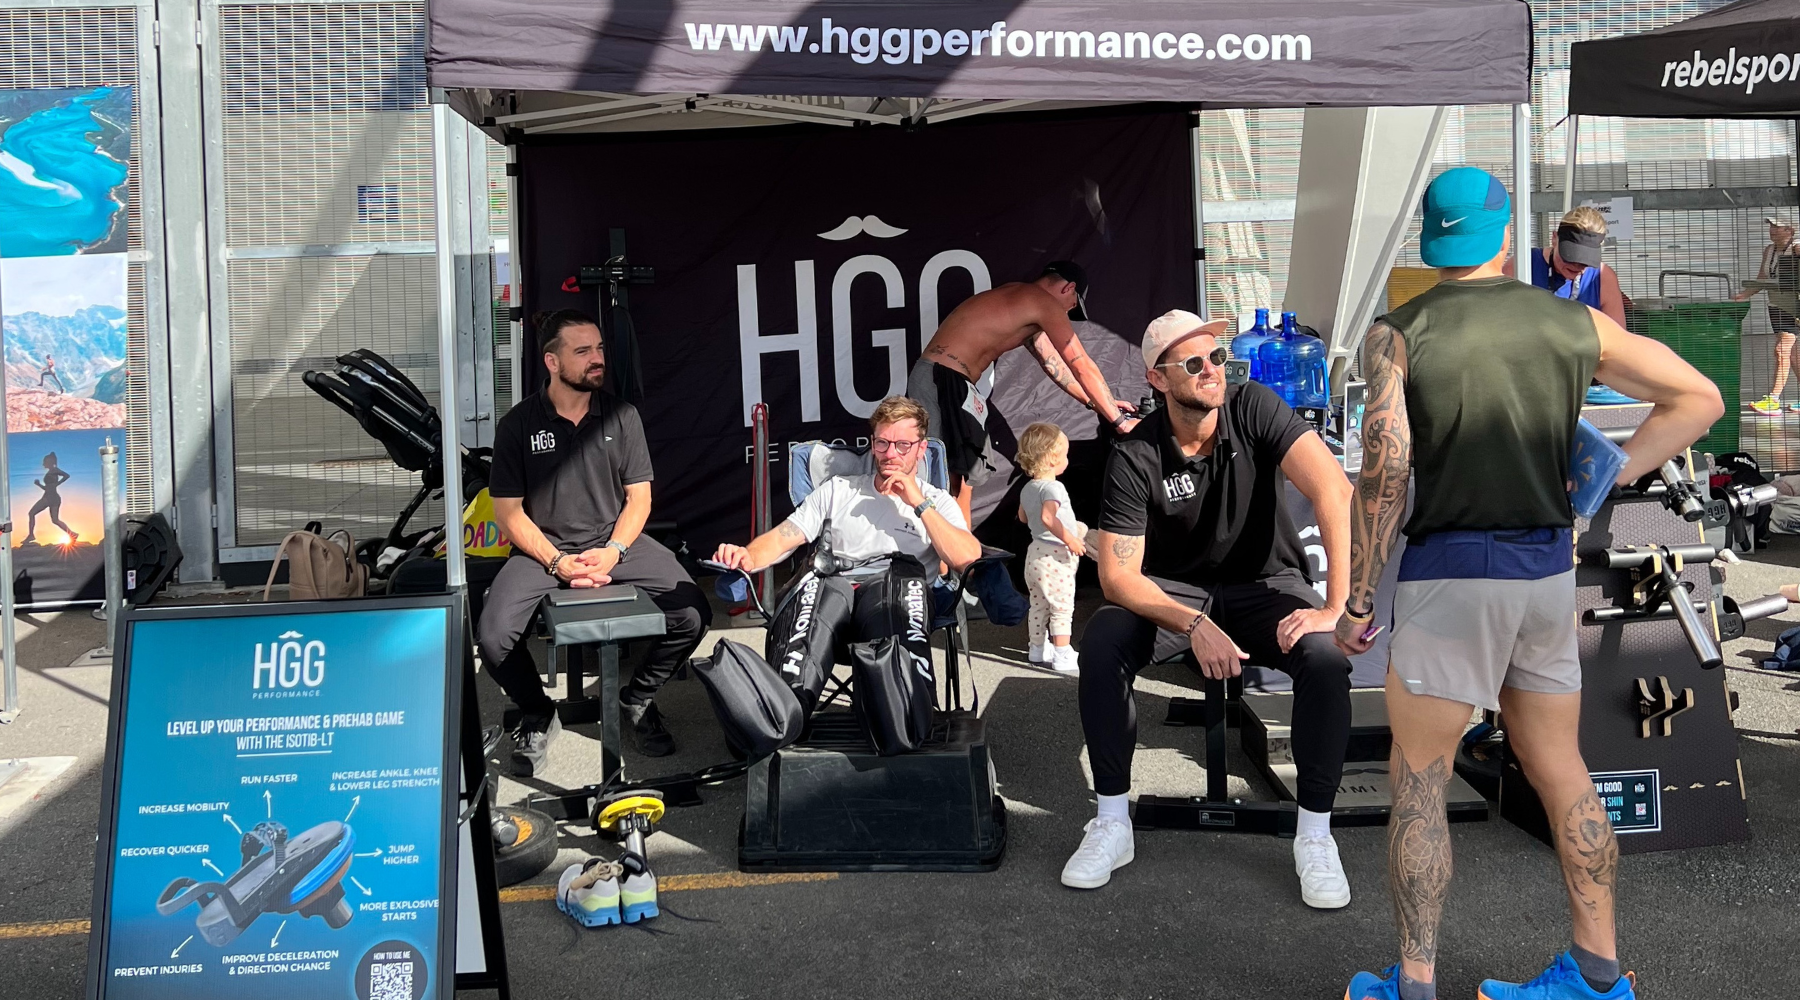 hgg performance at the gold coast running festival